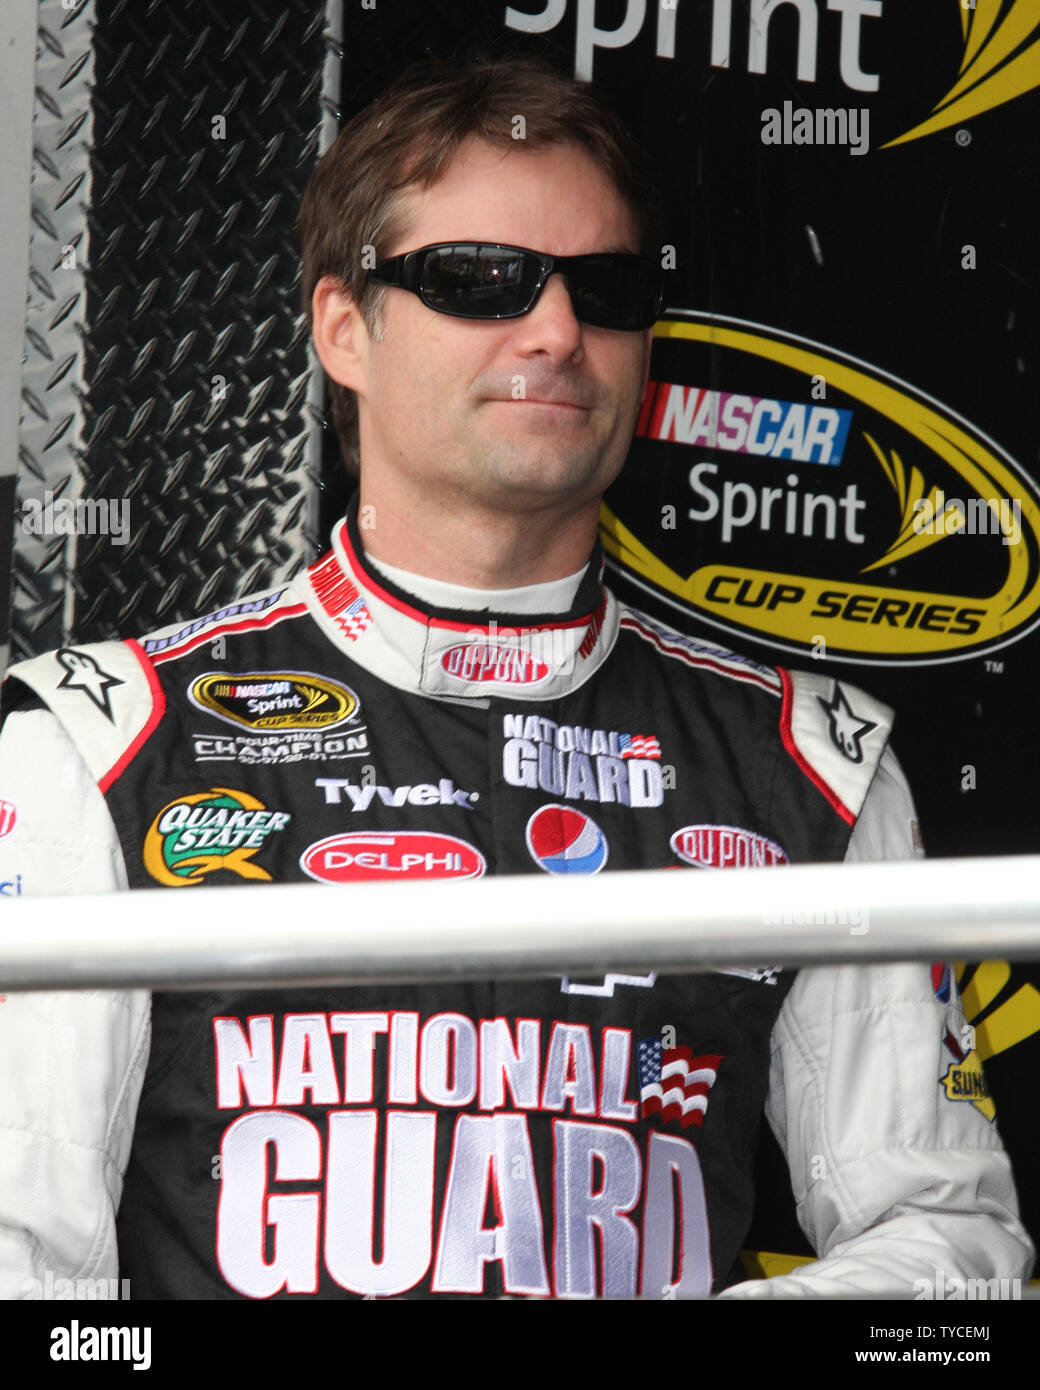 Jeff Gordon waits for driver introductions for the Nascar Sprint Cup Series SYLVANIA 300 Race at New Hampshire Motor Speedway in Loudon, New Hampshire on September 19, 2010 . UPI/Malcolm Hope Stock Photo